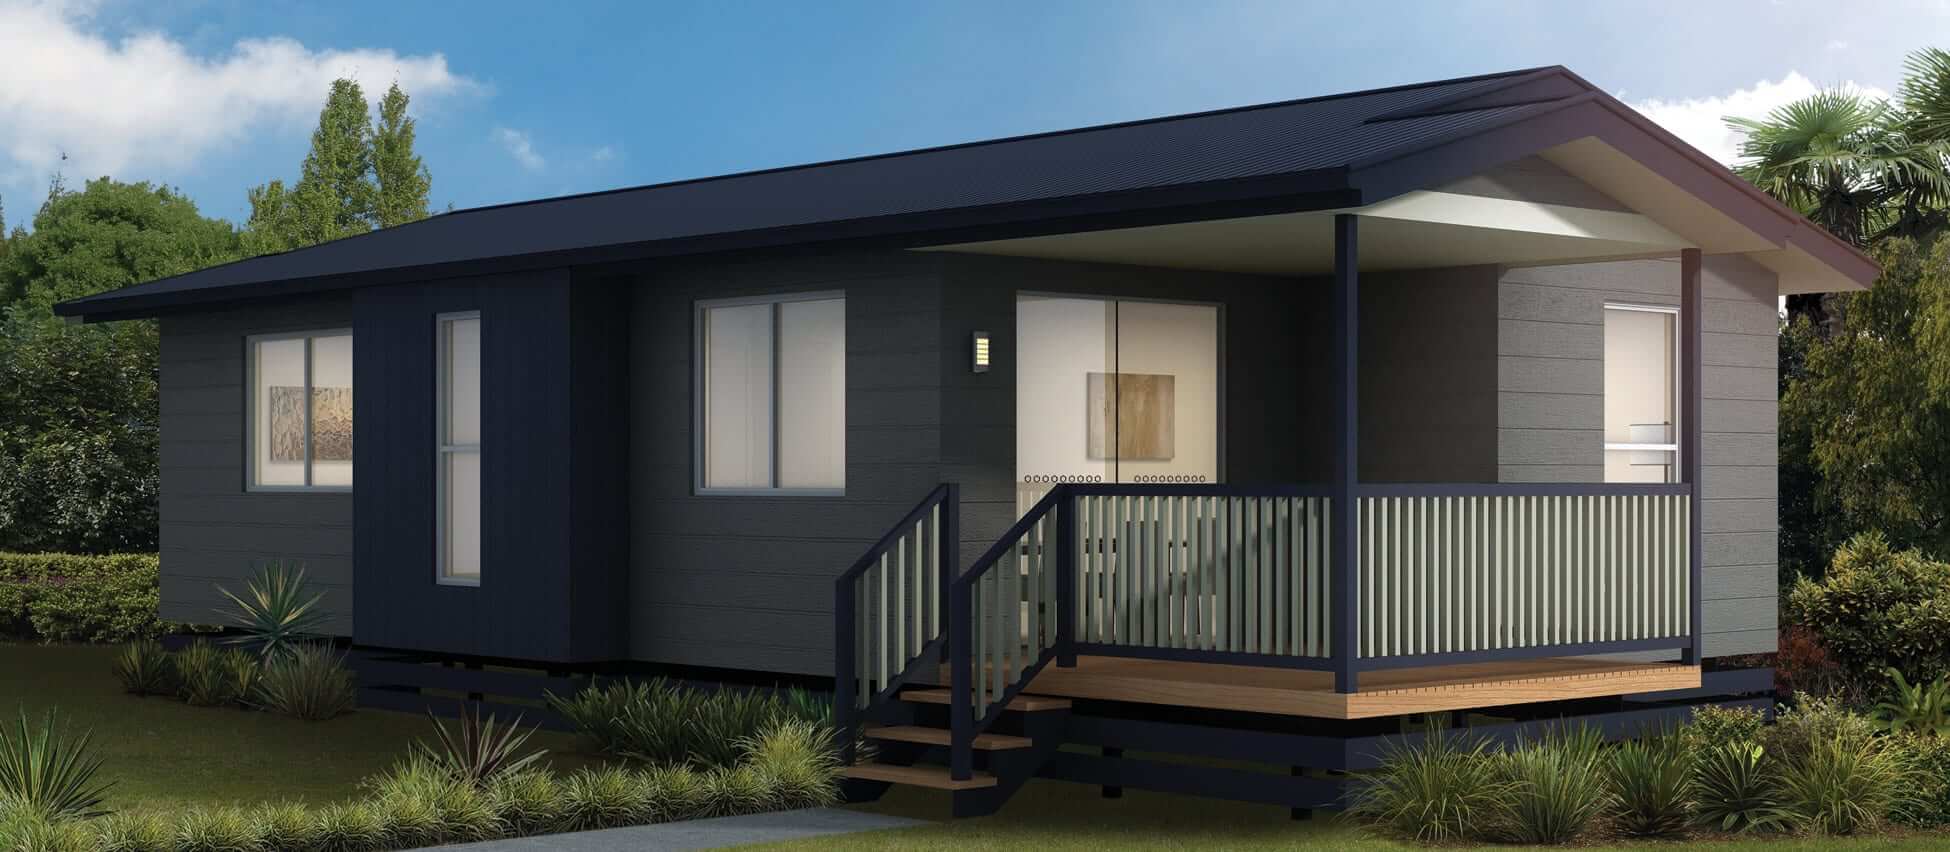 Reasons why removable granny flats are gaining popularity today